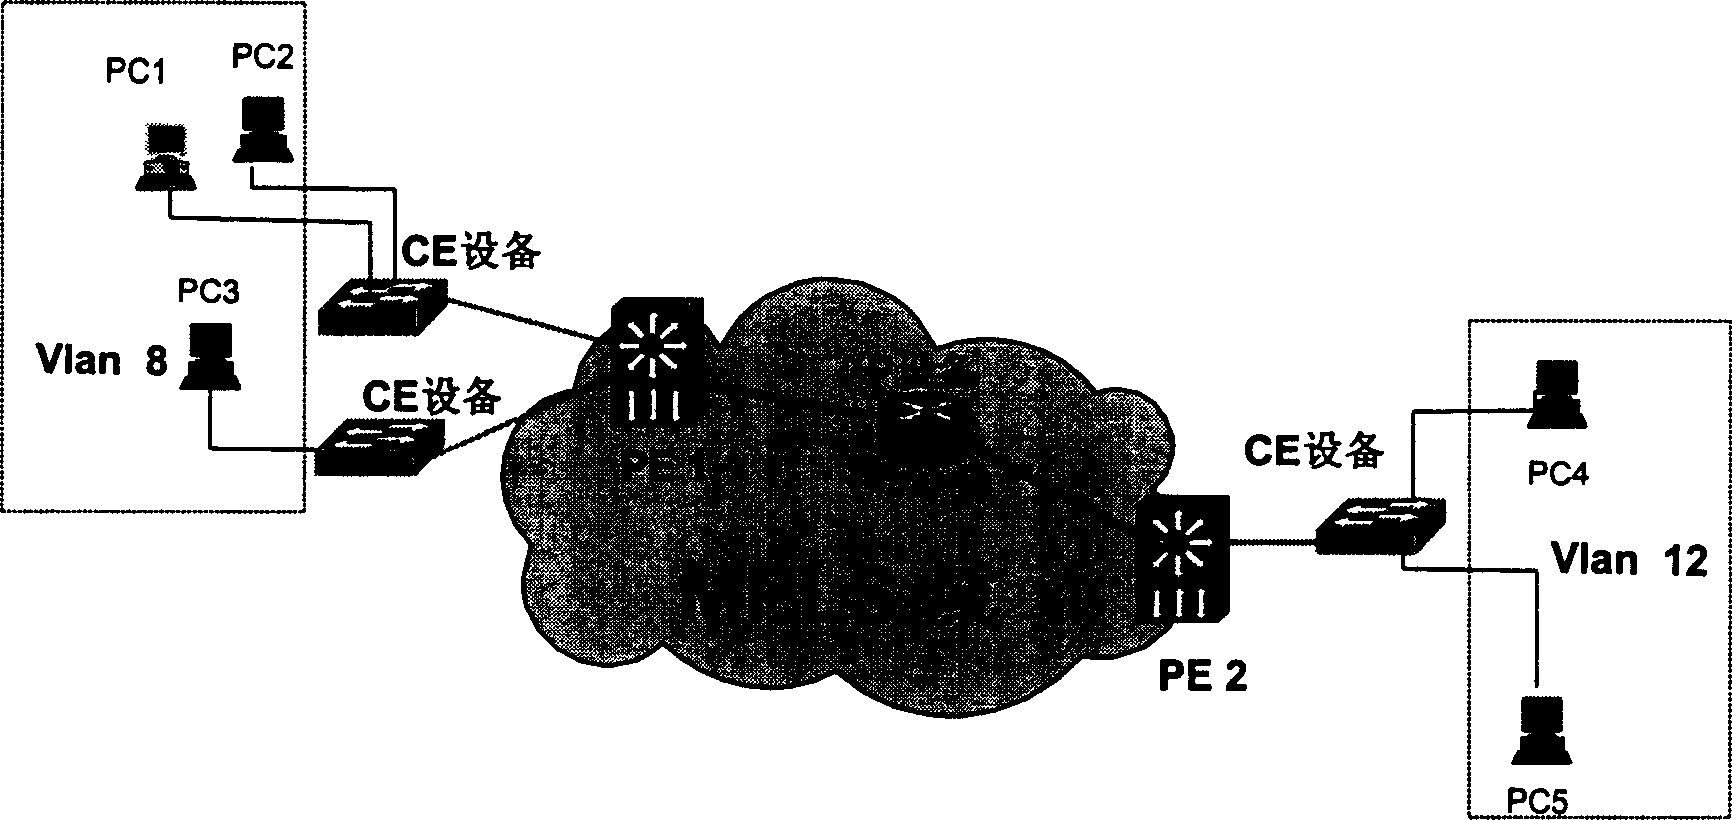 Method for processing extra-long message in two-layer virtual special-purpose network